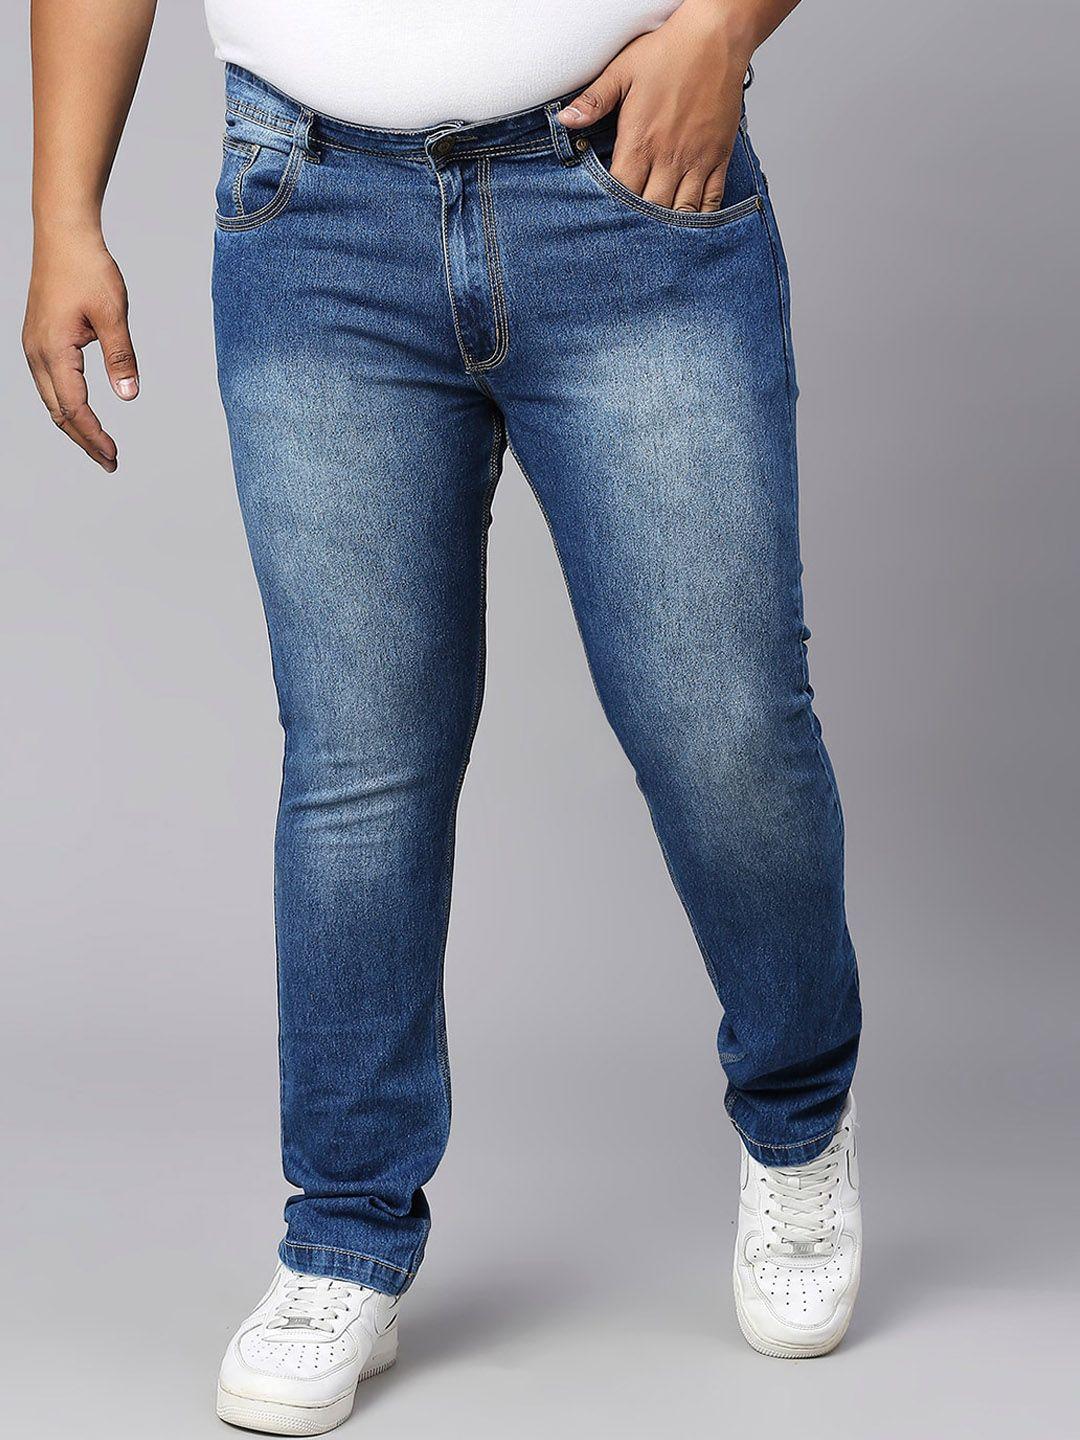 hj-hasasi-men-plus-size-heavy-fade-clean-look-stretchable-jeans